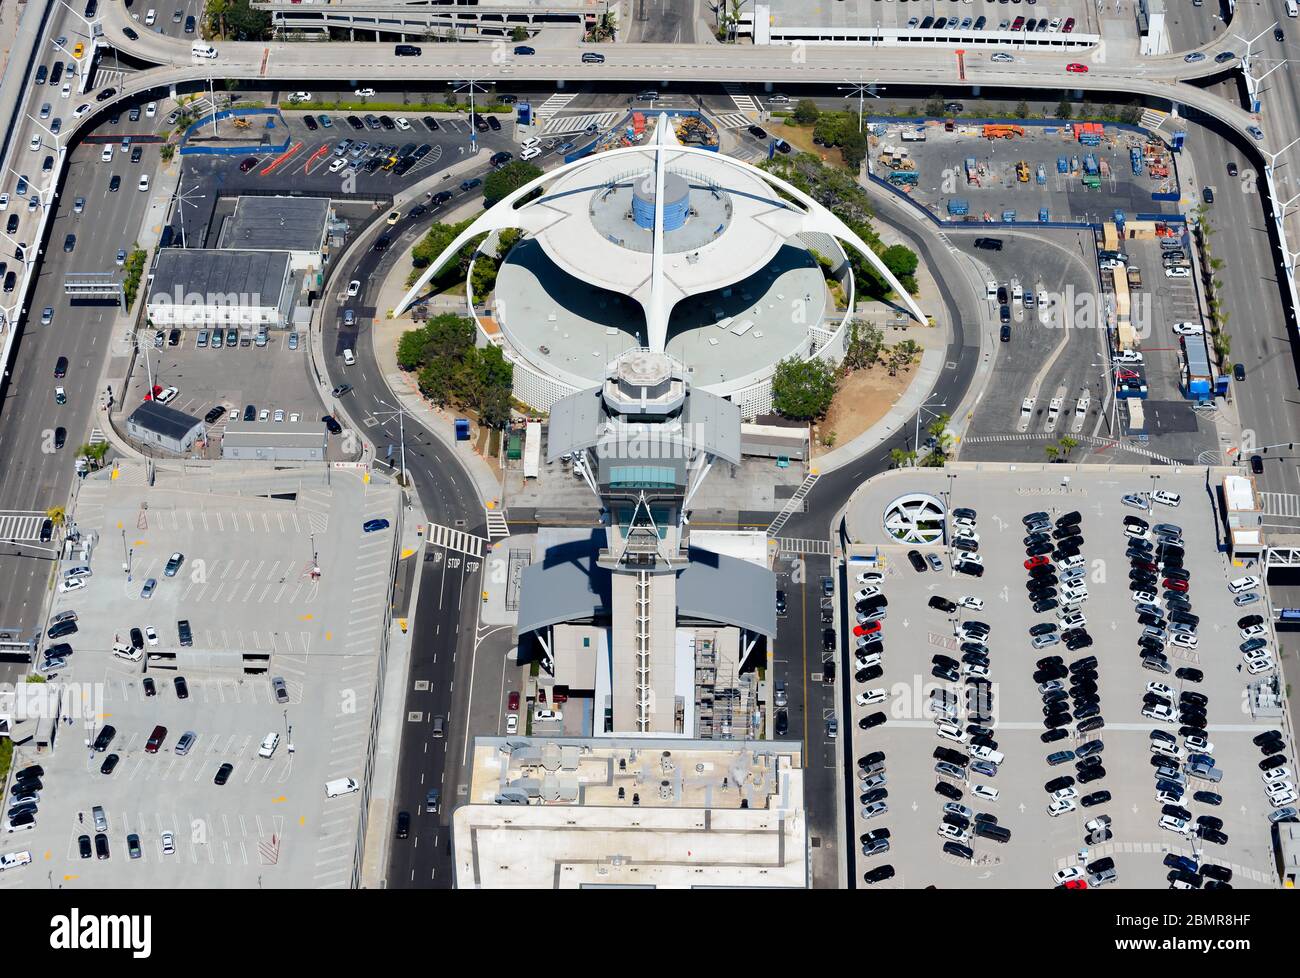 Air Traffic Control tower (ATC) and Theme Building at Los Angeles LAX Airport, USA. Multiple parking lots around Center Way and World Way Road. Stock Photo